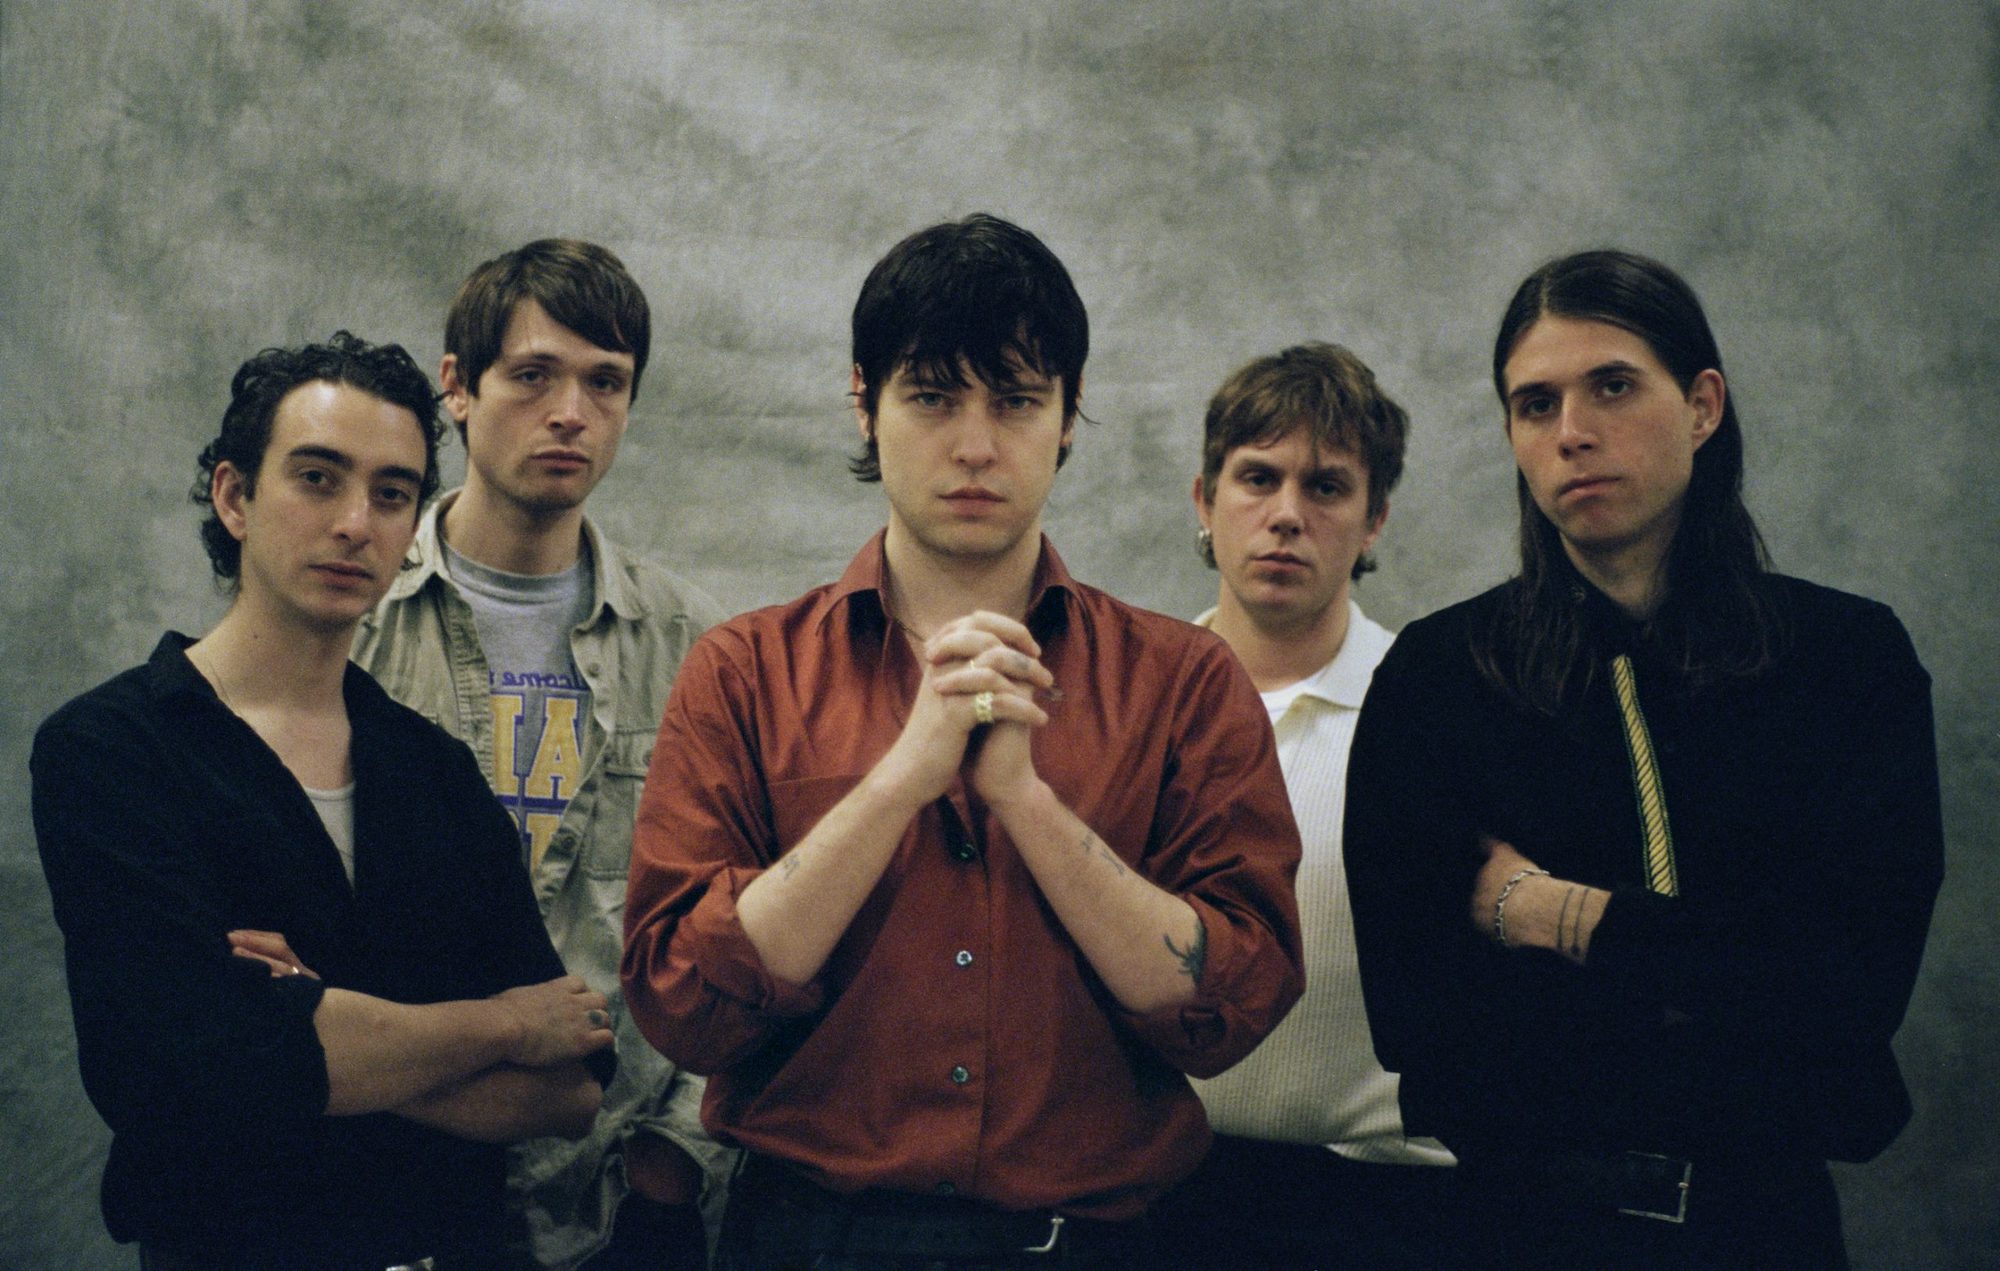 Iceage band